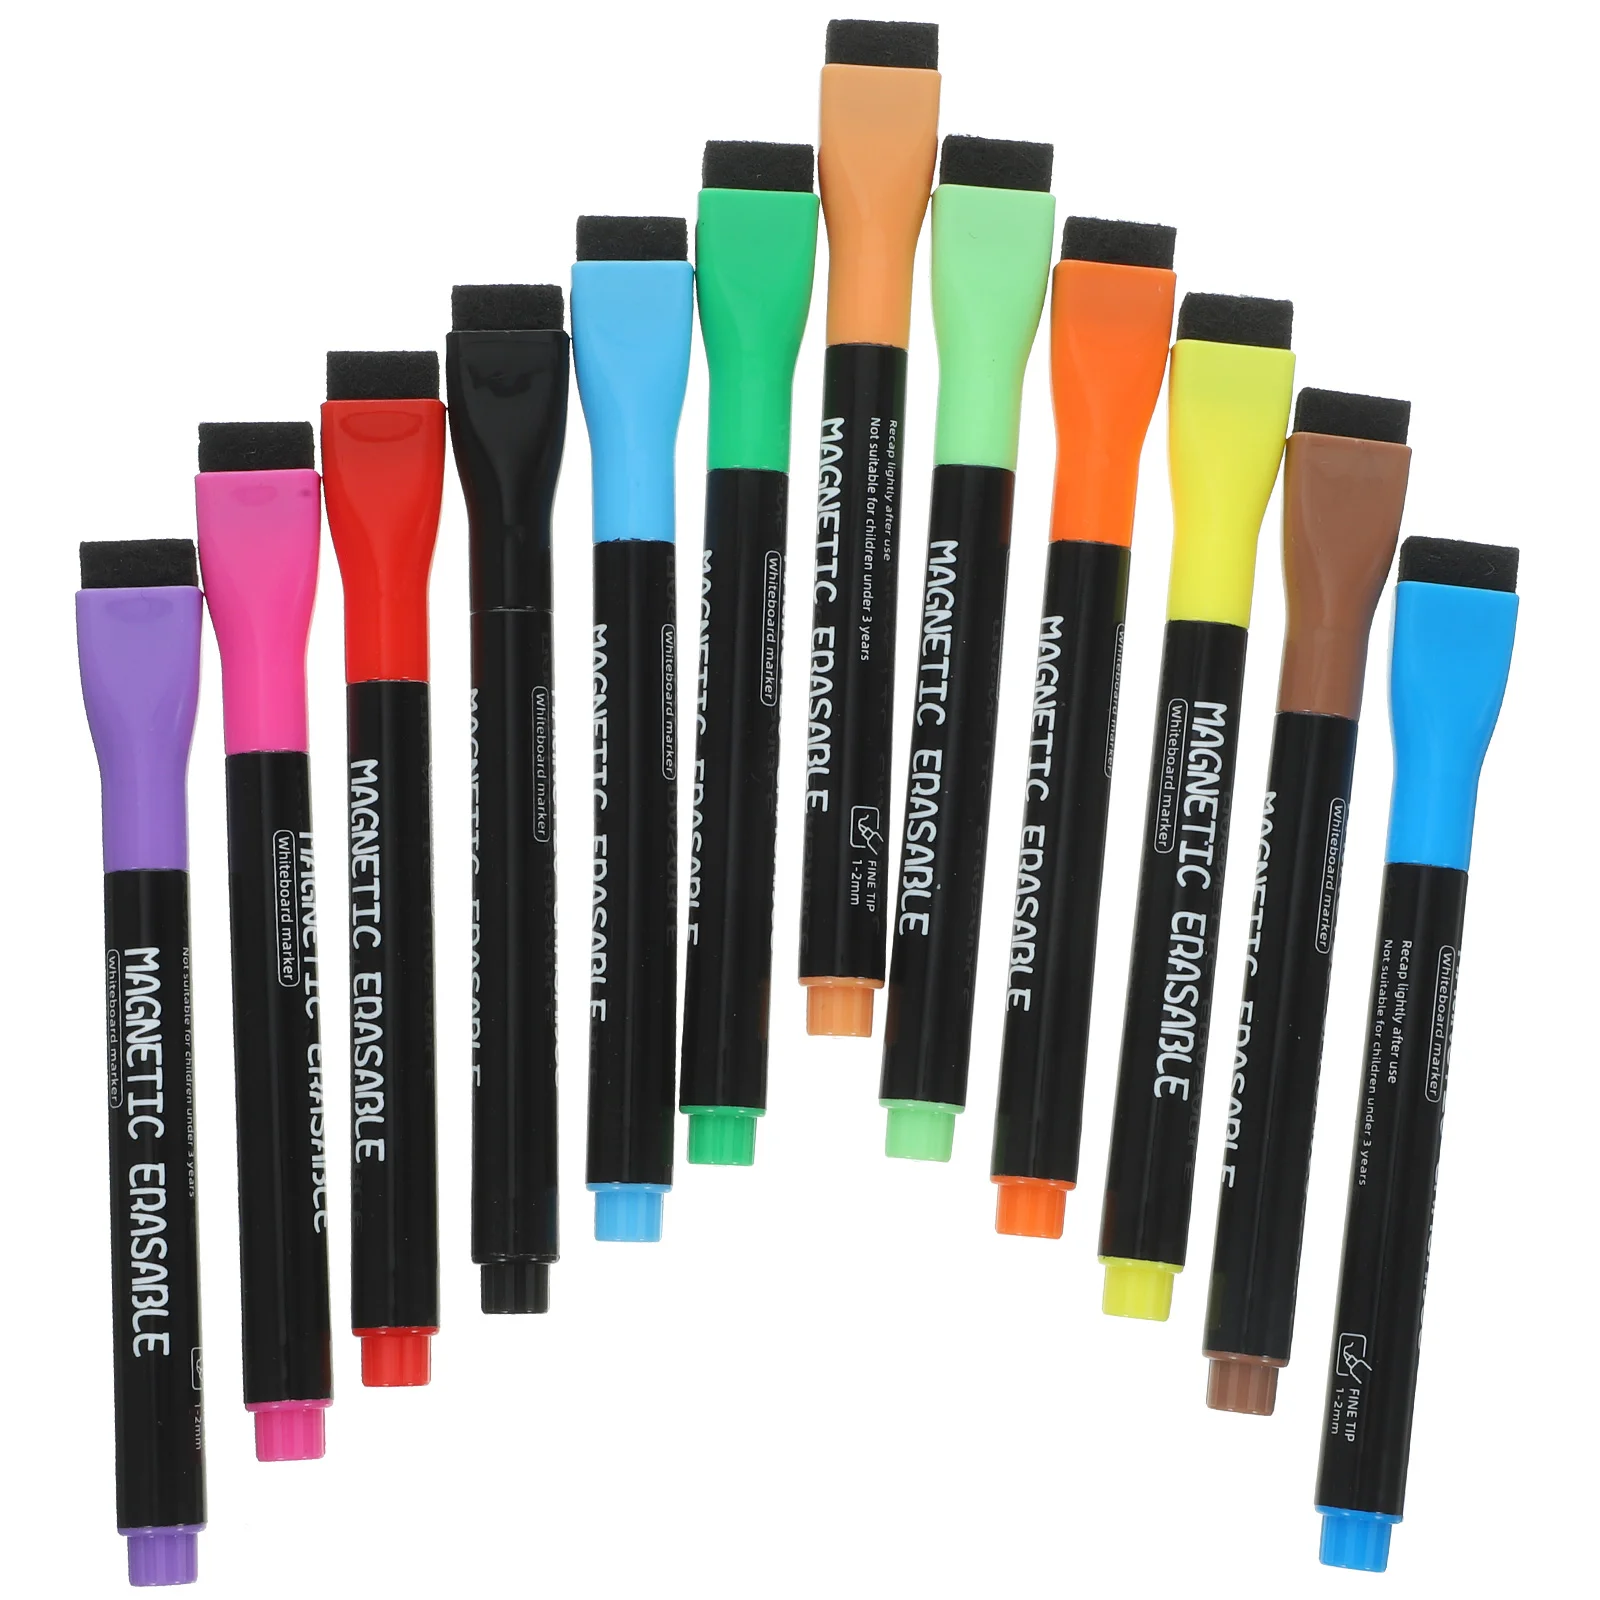 

12 Pcs Whiteboard Pen Drawing Pens Dry Erase Marker Markers Coloured Glass Creative Fine Point Abs Painting Office